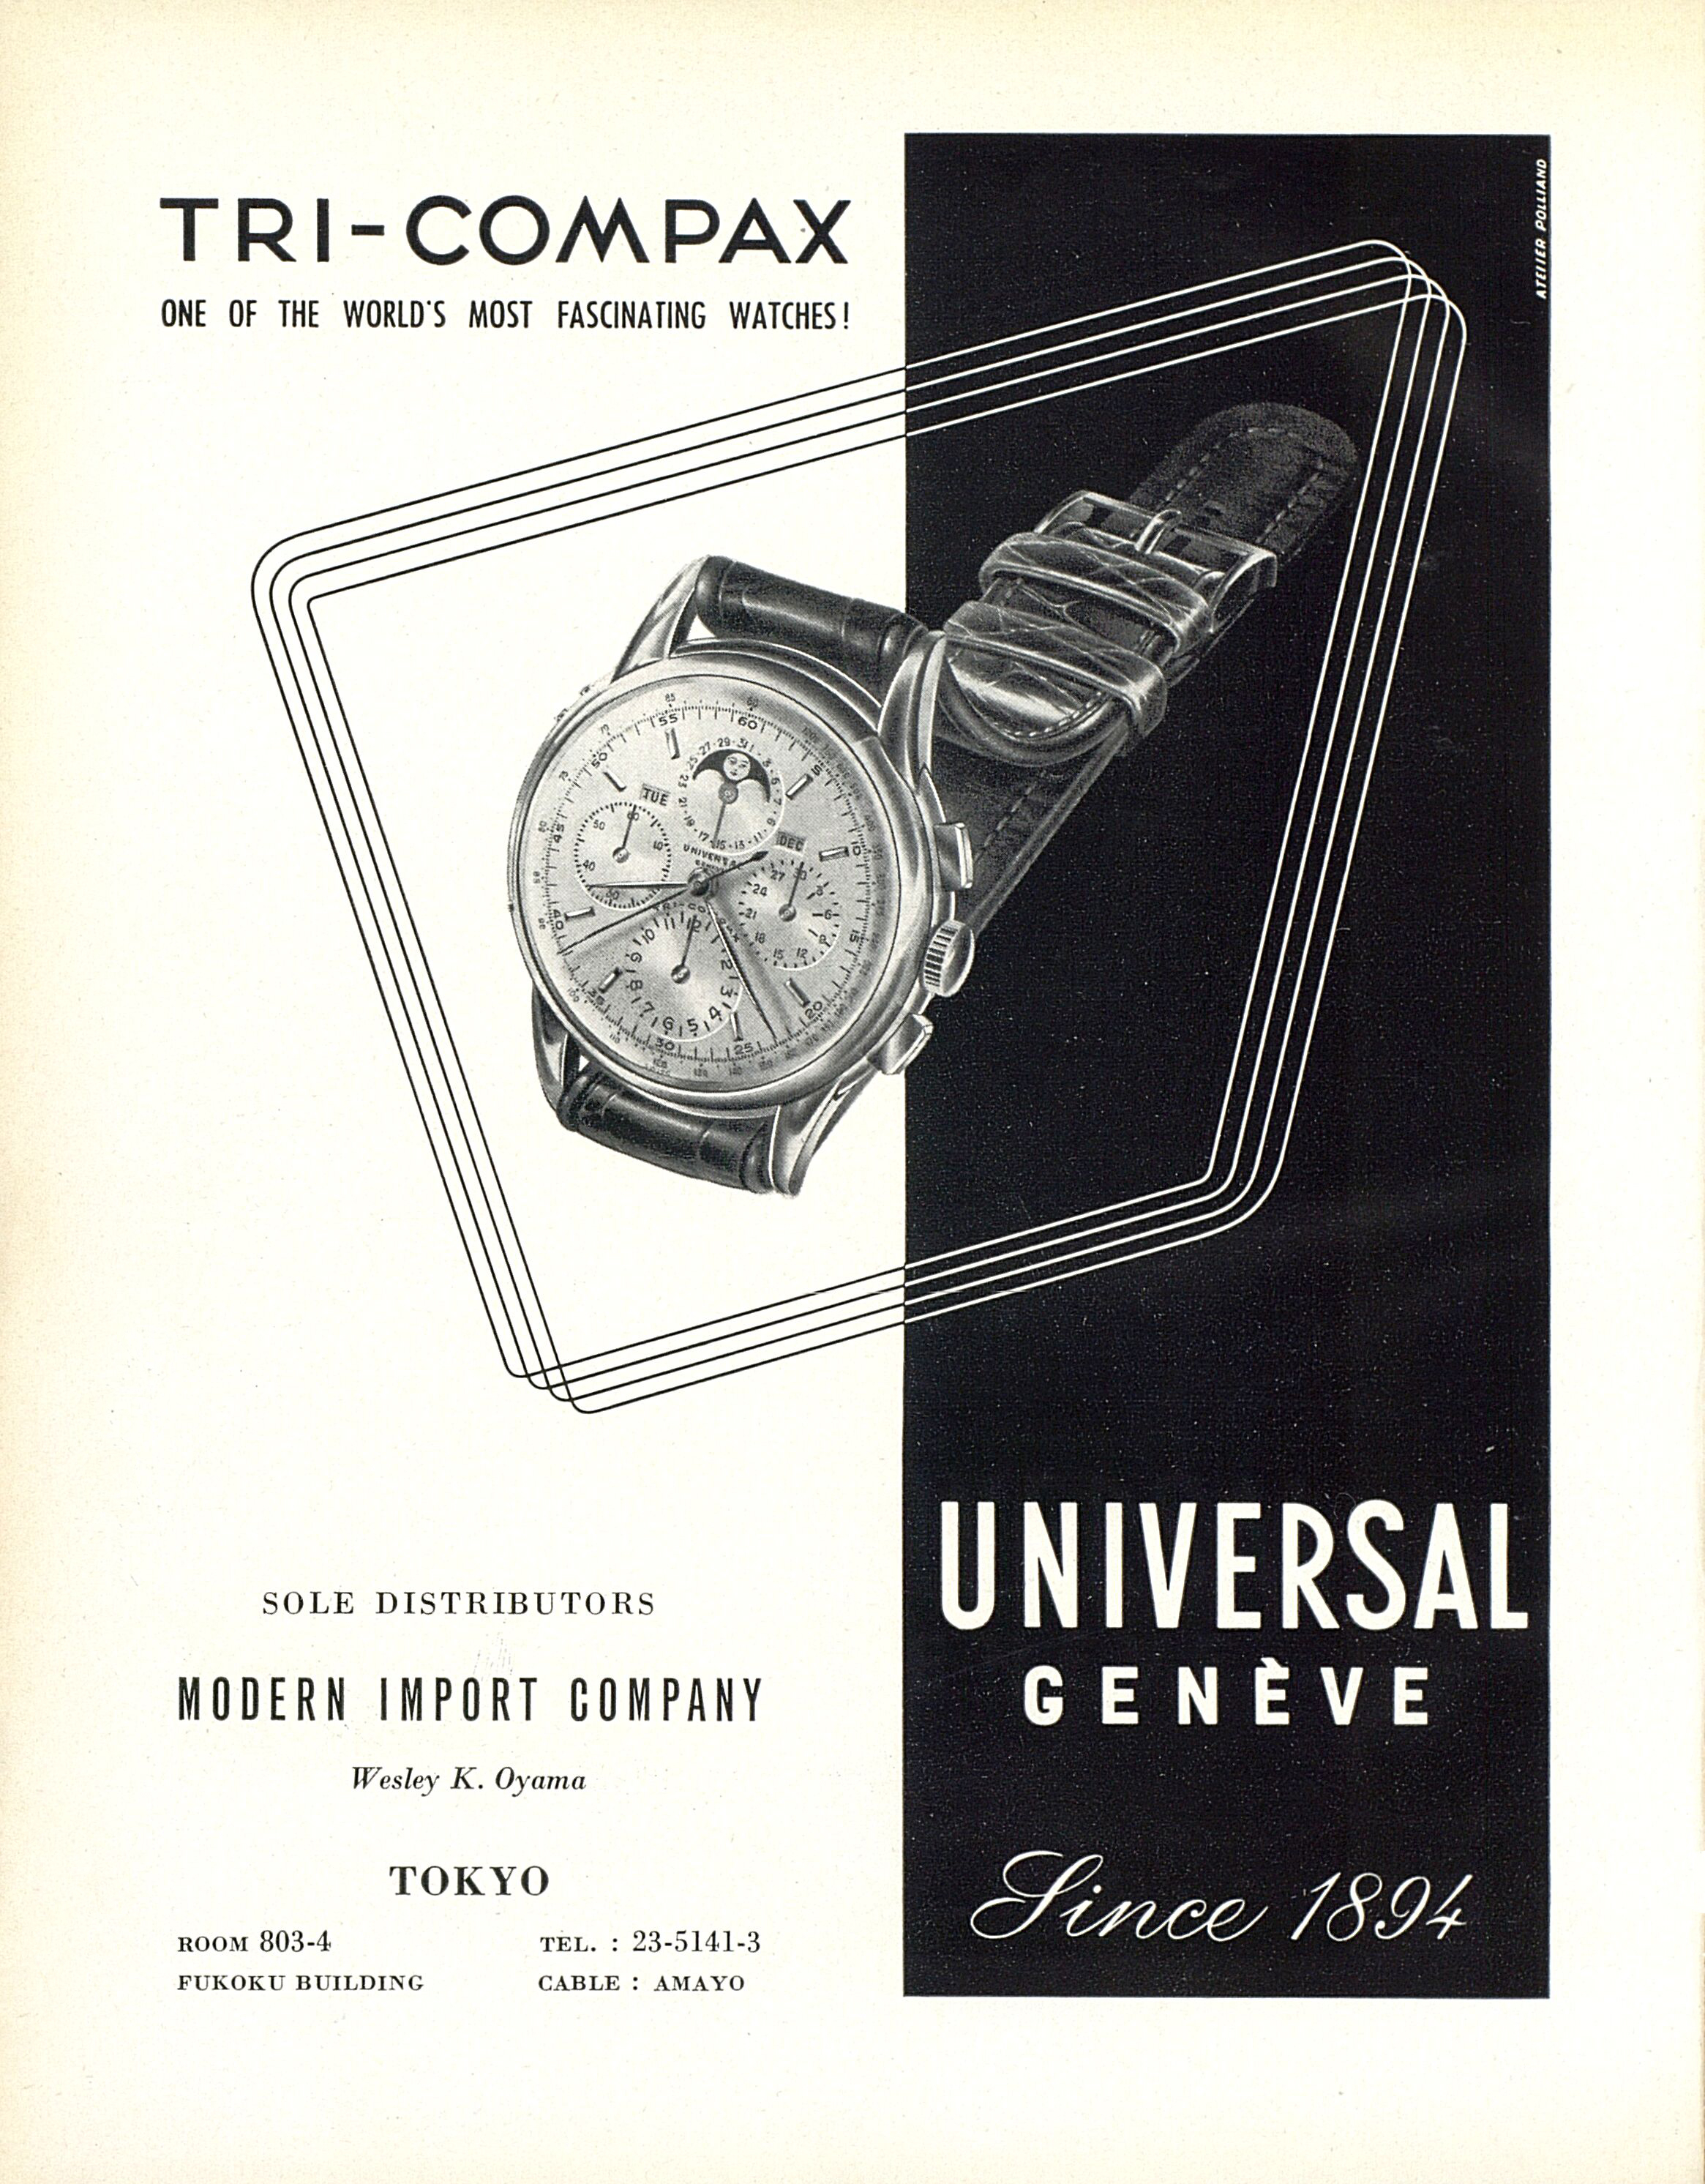 02_Vintage_ad_for_the_Universal_Geneve_Tri-Compax_published_in_Europa_Star_in_1952 semanalclasico